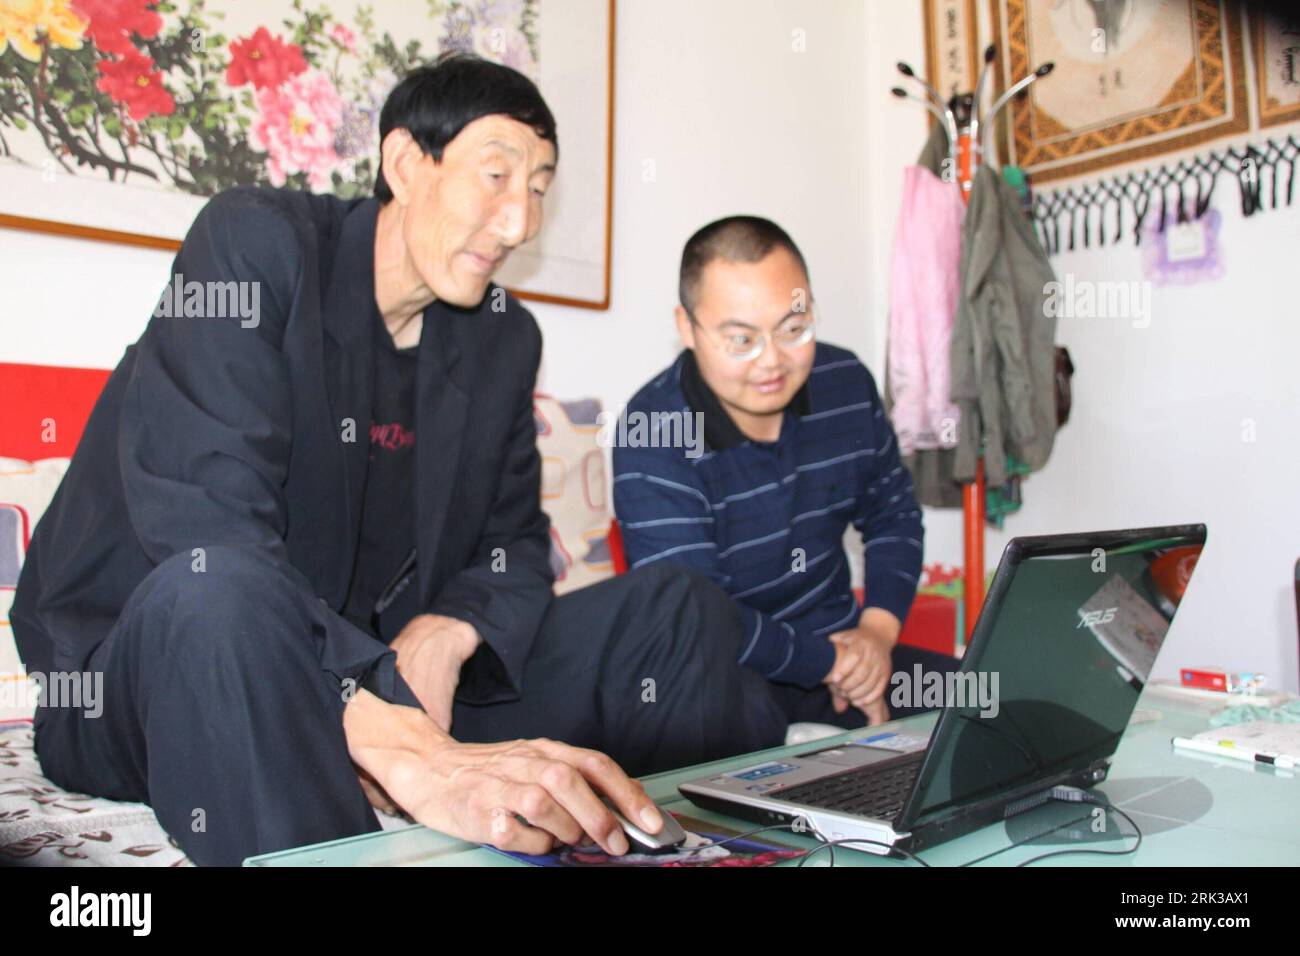 Bildnummer: 53401062  Datum: 21.09.2009  Copyright: imago/Xinhua  -- CHIFENG,  (Xinhua) -- 2.36-meters-high Chinese herdsman Bao Xishun (L), the previous world s tallest man, browses news online at home, in Chifeng City, north China s Inner Mongolia Autonomous Region, Sept. 21, 2009. The Guinness World Records announced on September 16 that 27-year-old turkish man Sultan Kosen, having his height validated at 2.465 metres, takes over the title of the world s tallest man from China s Bao Xishun. Kosen s record was unveiled to mark the launch of the Guinness World Records 2010 edition, now in its Stock Photo